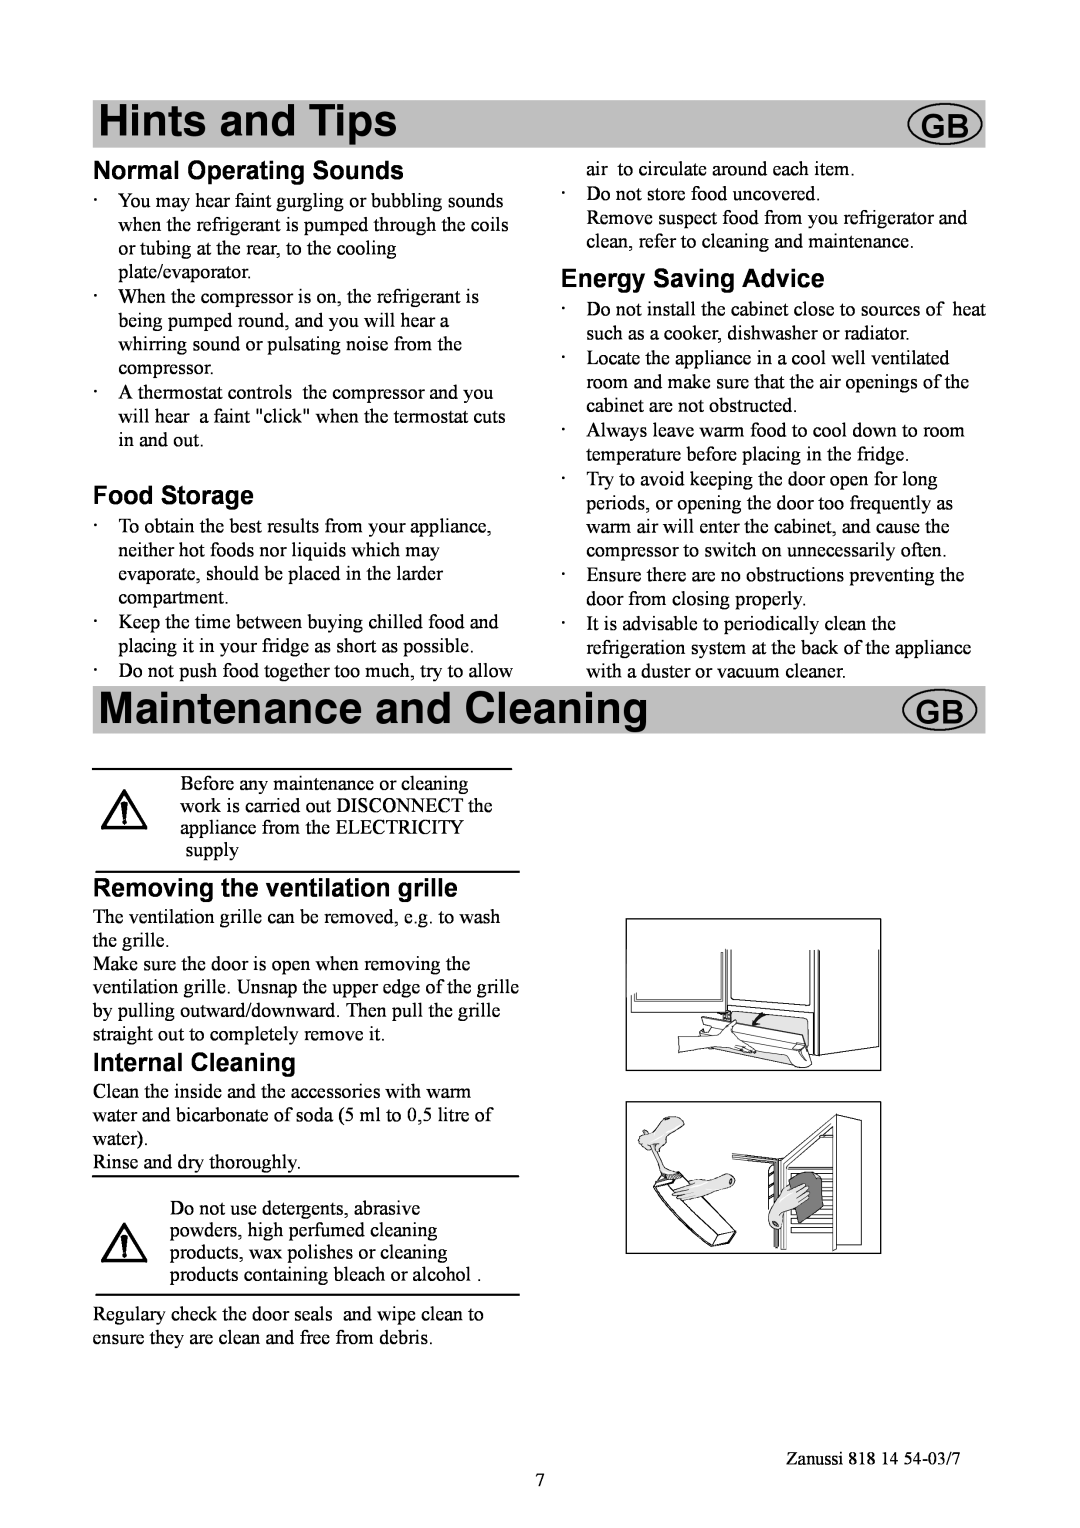 Zanussi ZCR135R Hints and Tips, Maintenance and Cleaning, Normal Operating Sounds, Energy Saving Advice, Food Storage 